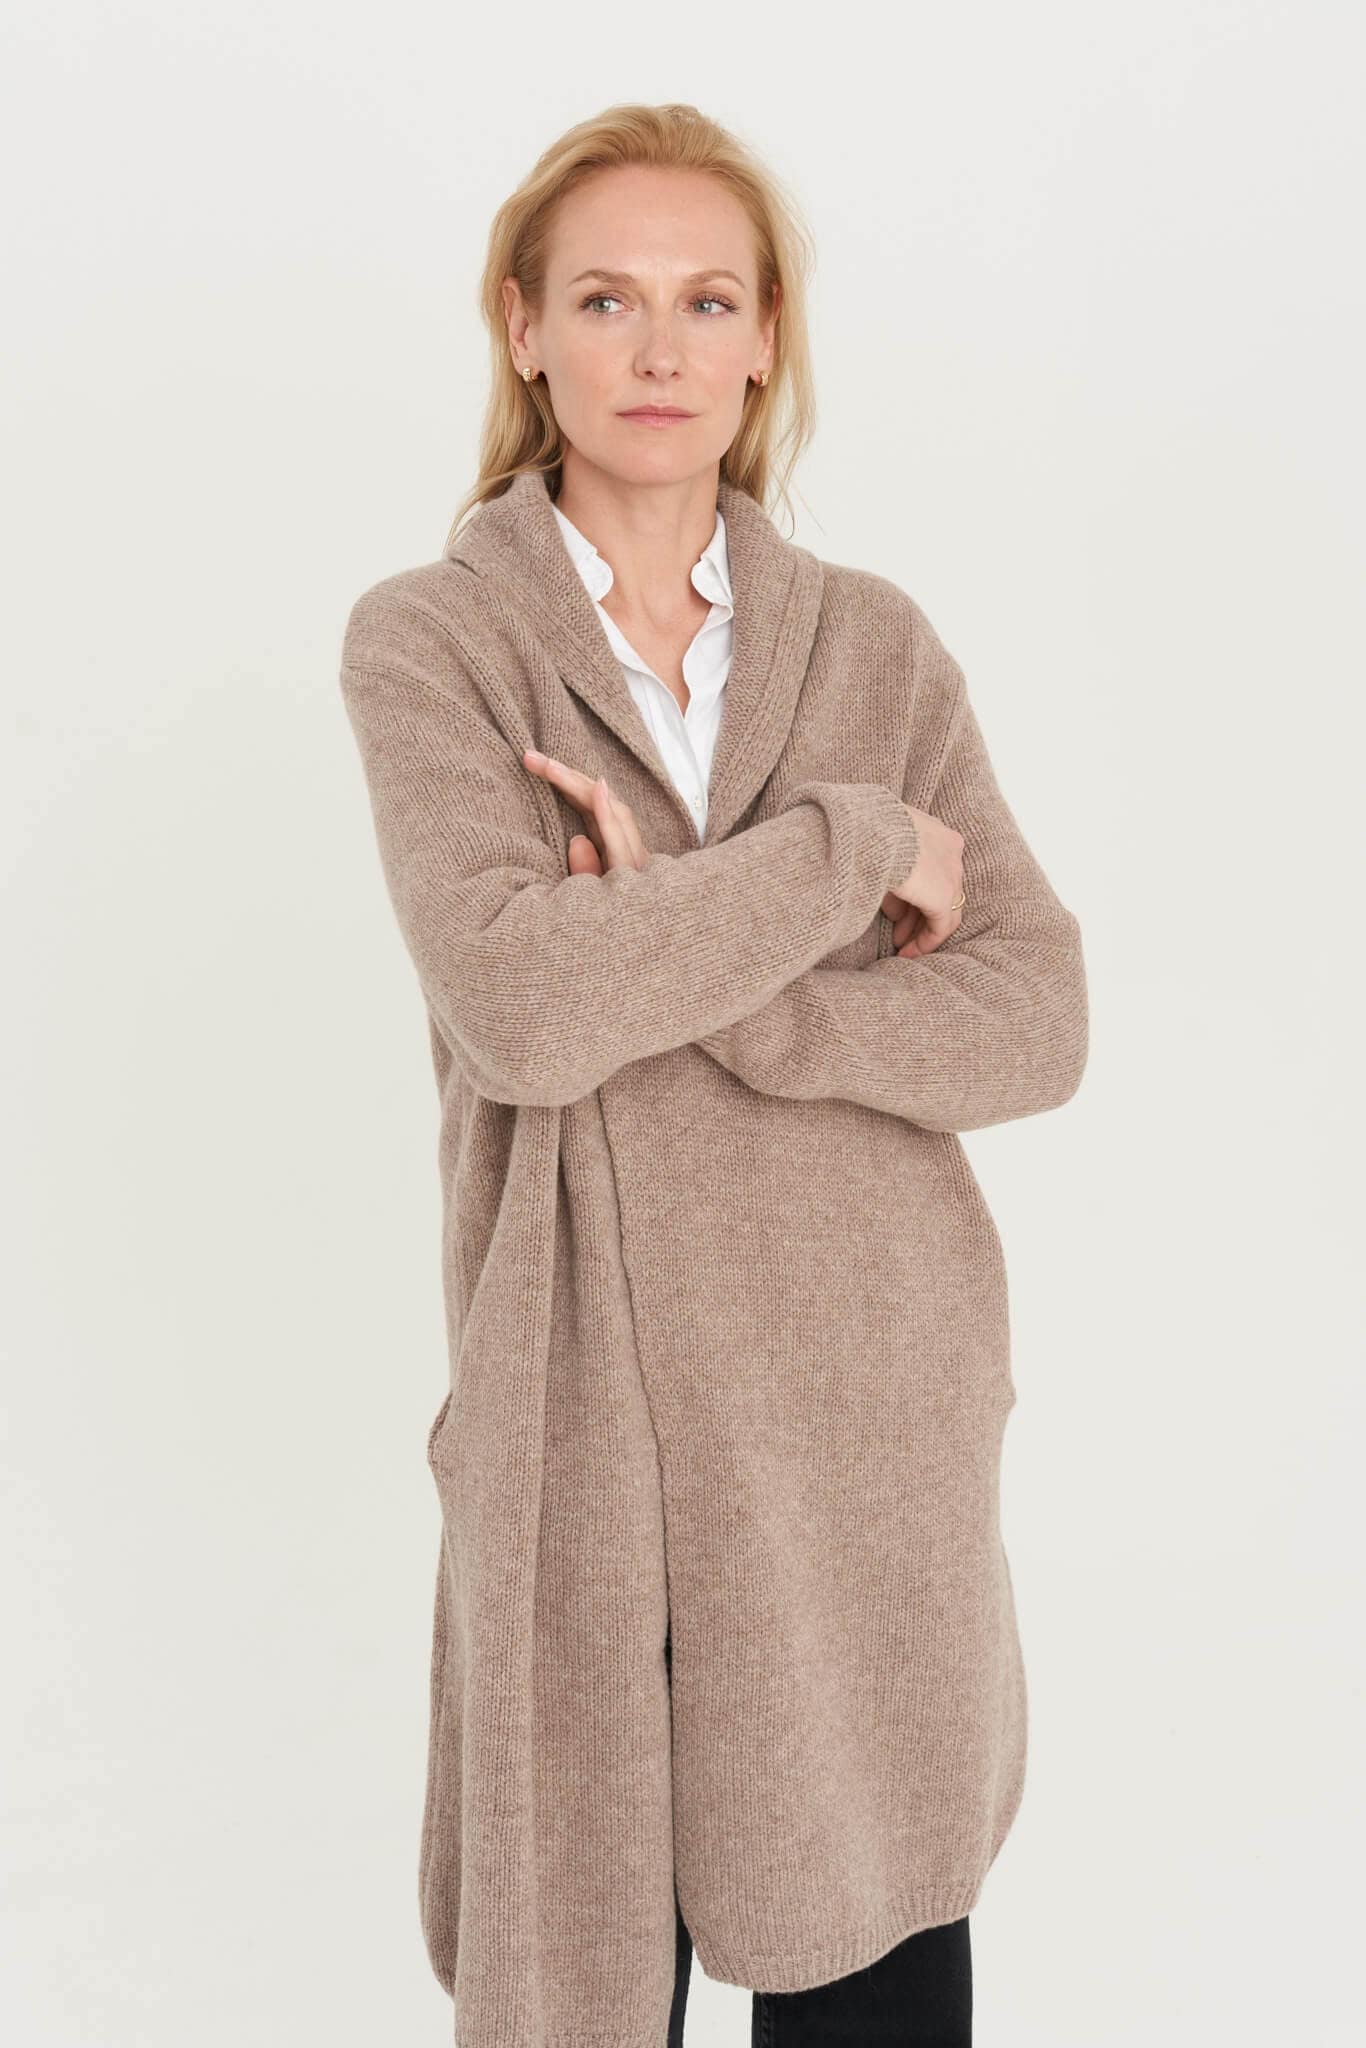 Knitted Cashmere Wool Cardigan, Long Women's Coat With